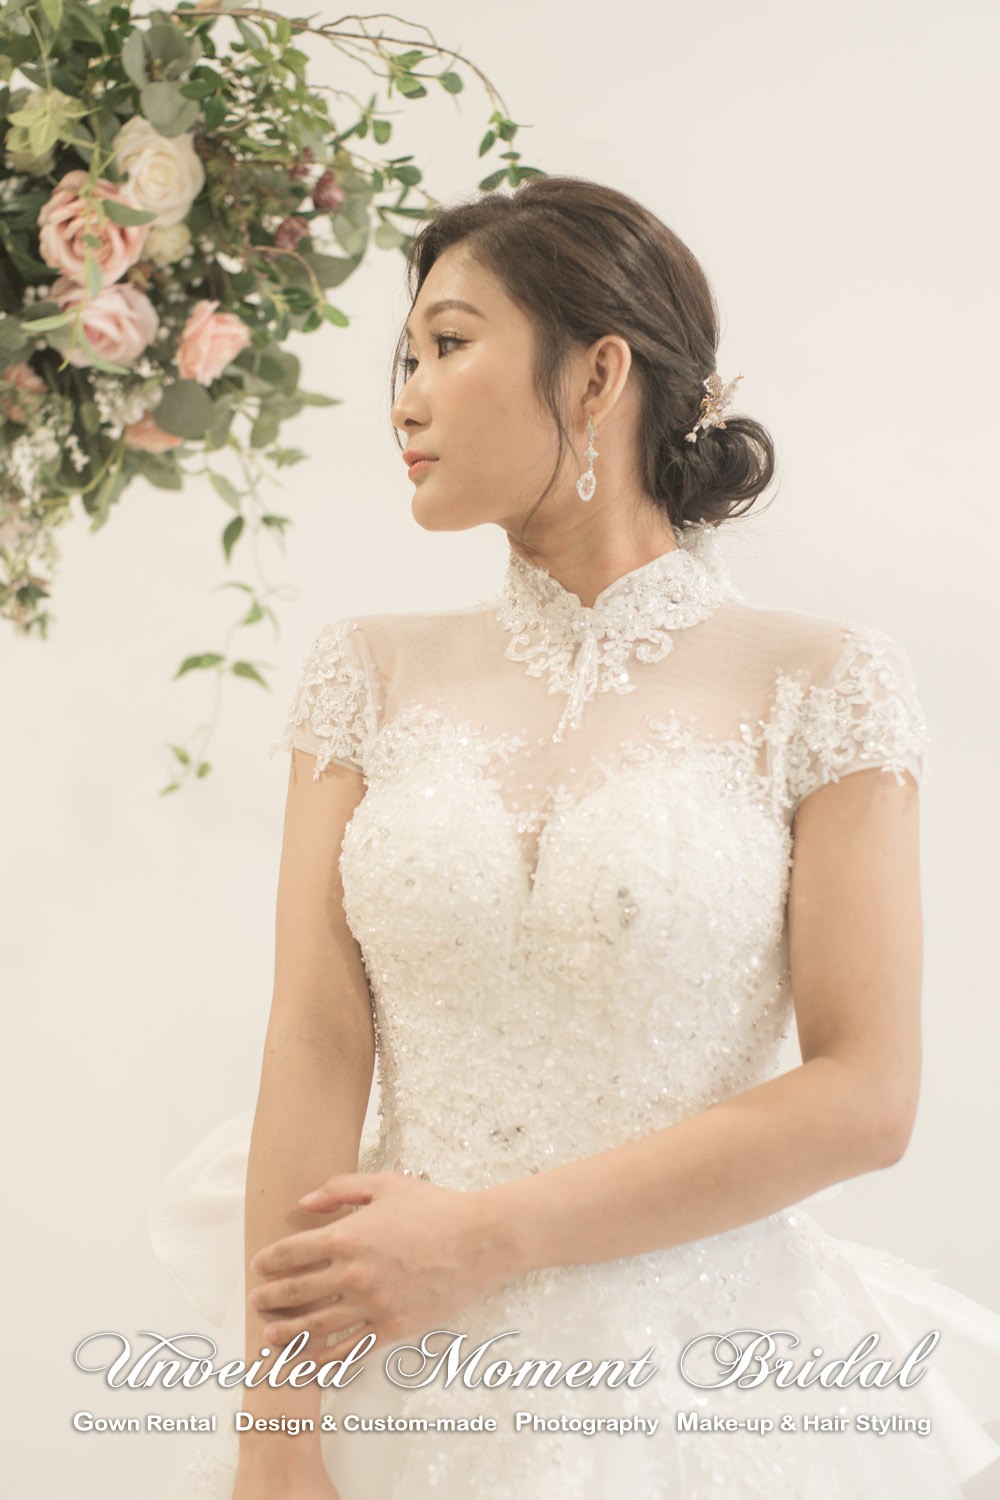 Bride wearing cap-sleeves, High collar wedding gown with embellished lace open-back bodice, ruffles on skirt back and decorative lace chapel train 新娘穿上雞翼袖, 企領, 蕾絲釘珠, 蕾絲花邉長拖尾婚紗B